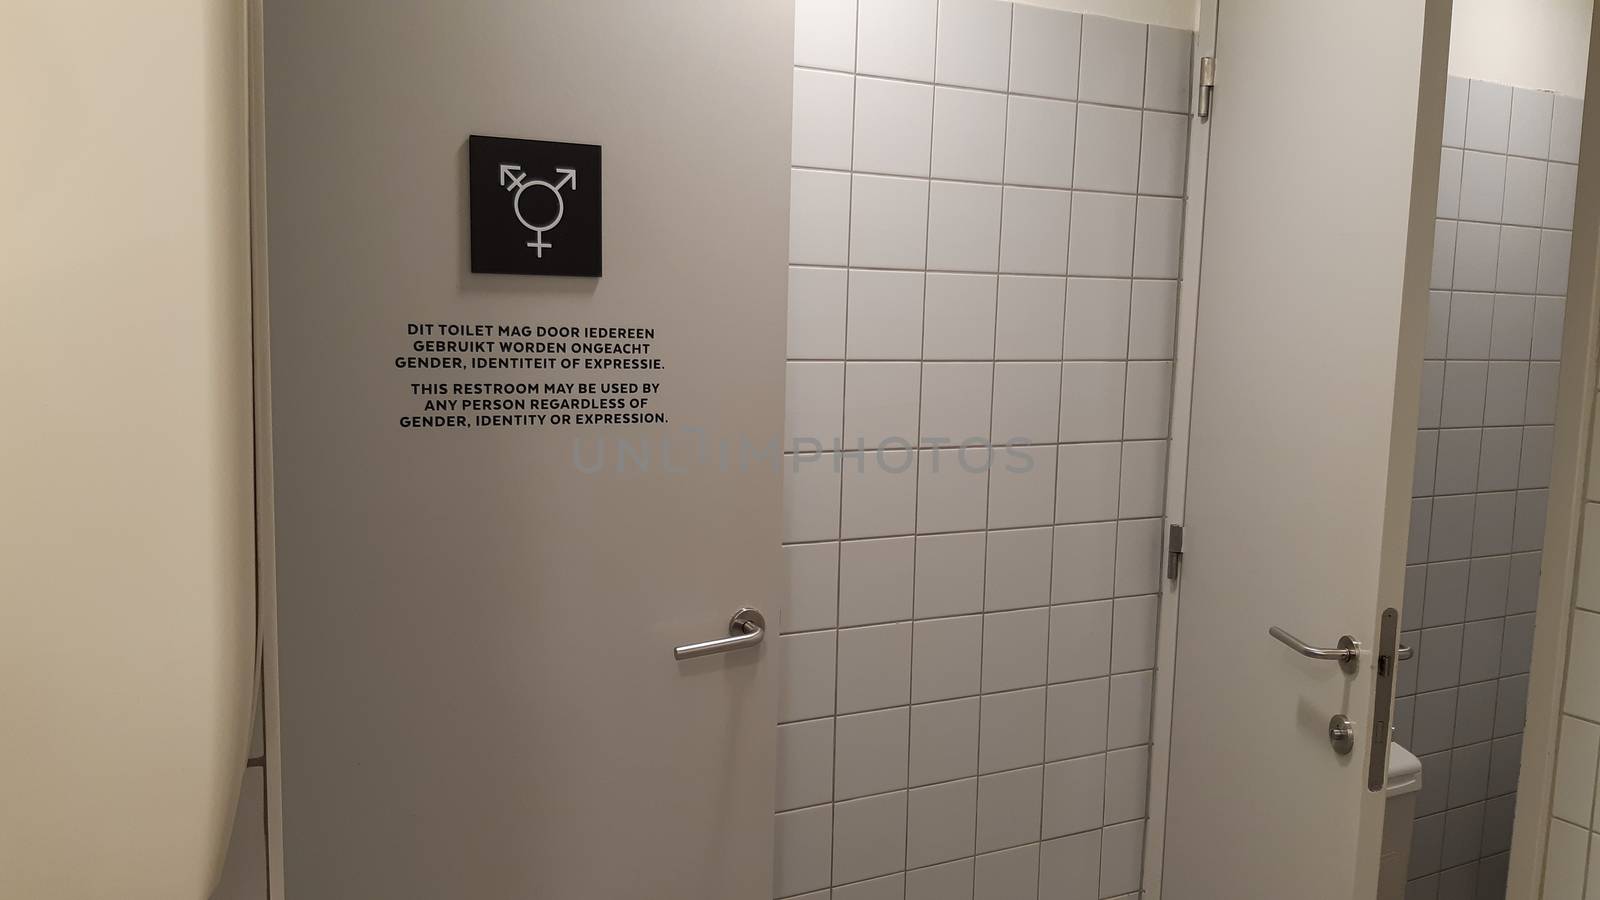 Antwerp, Belgium, May 2020: Gender neutral toilet symbol and sign on a door, in Dutch and English language